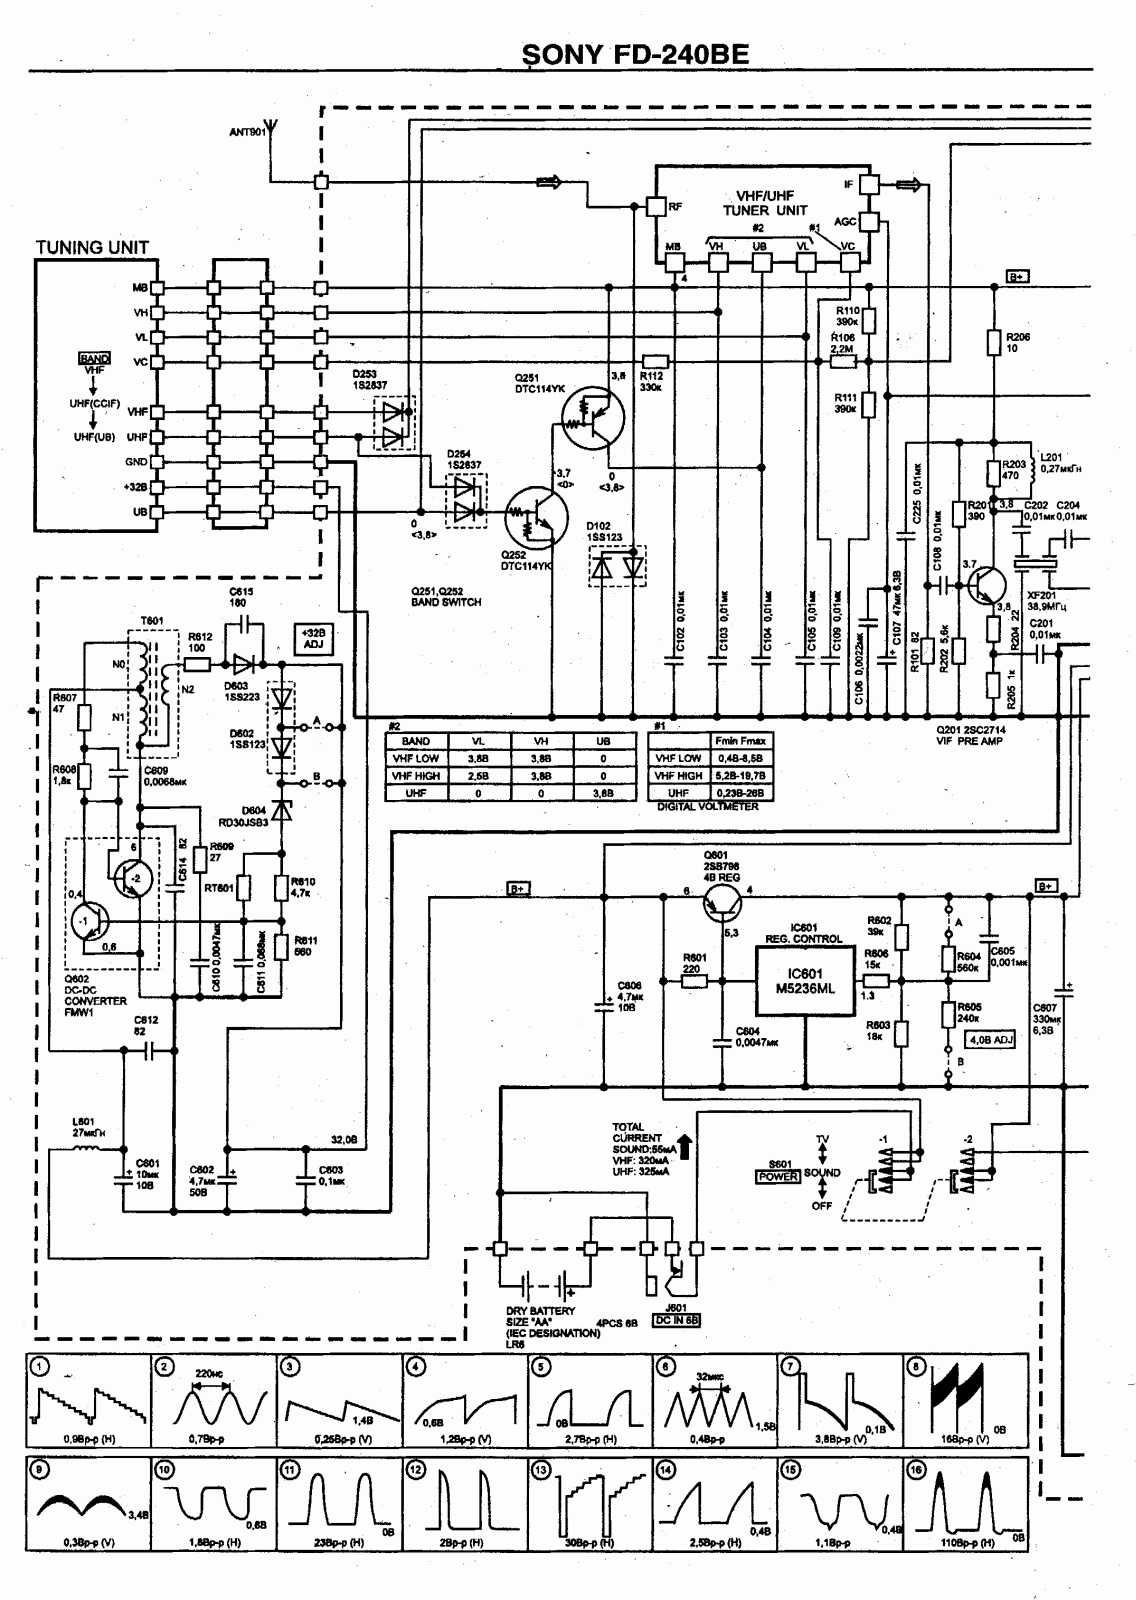 Sony FD-240BE Schematic